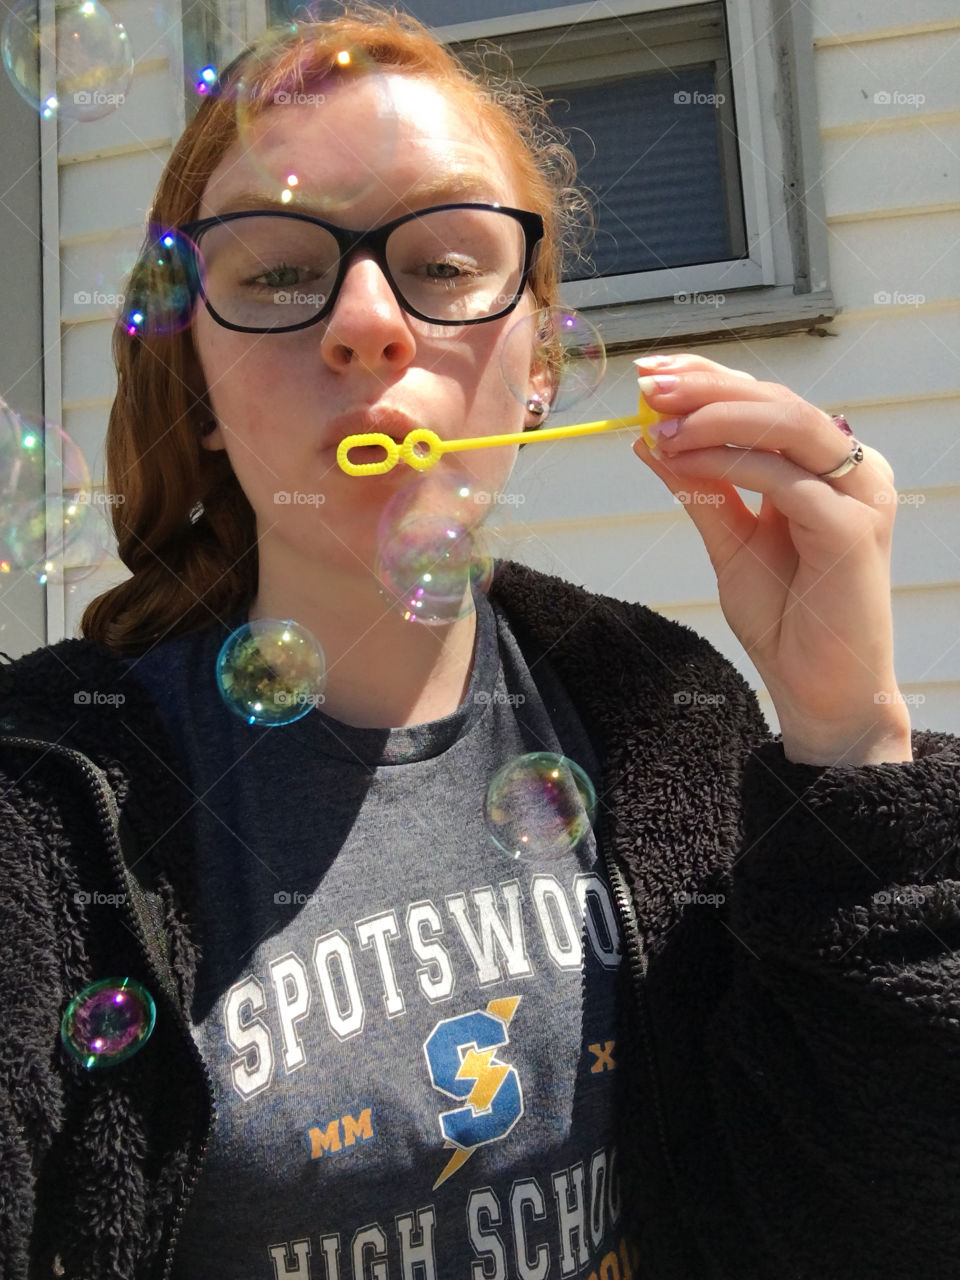 girl blowing bubbles
red hair, blue eyes, glasses, wick